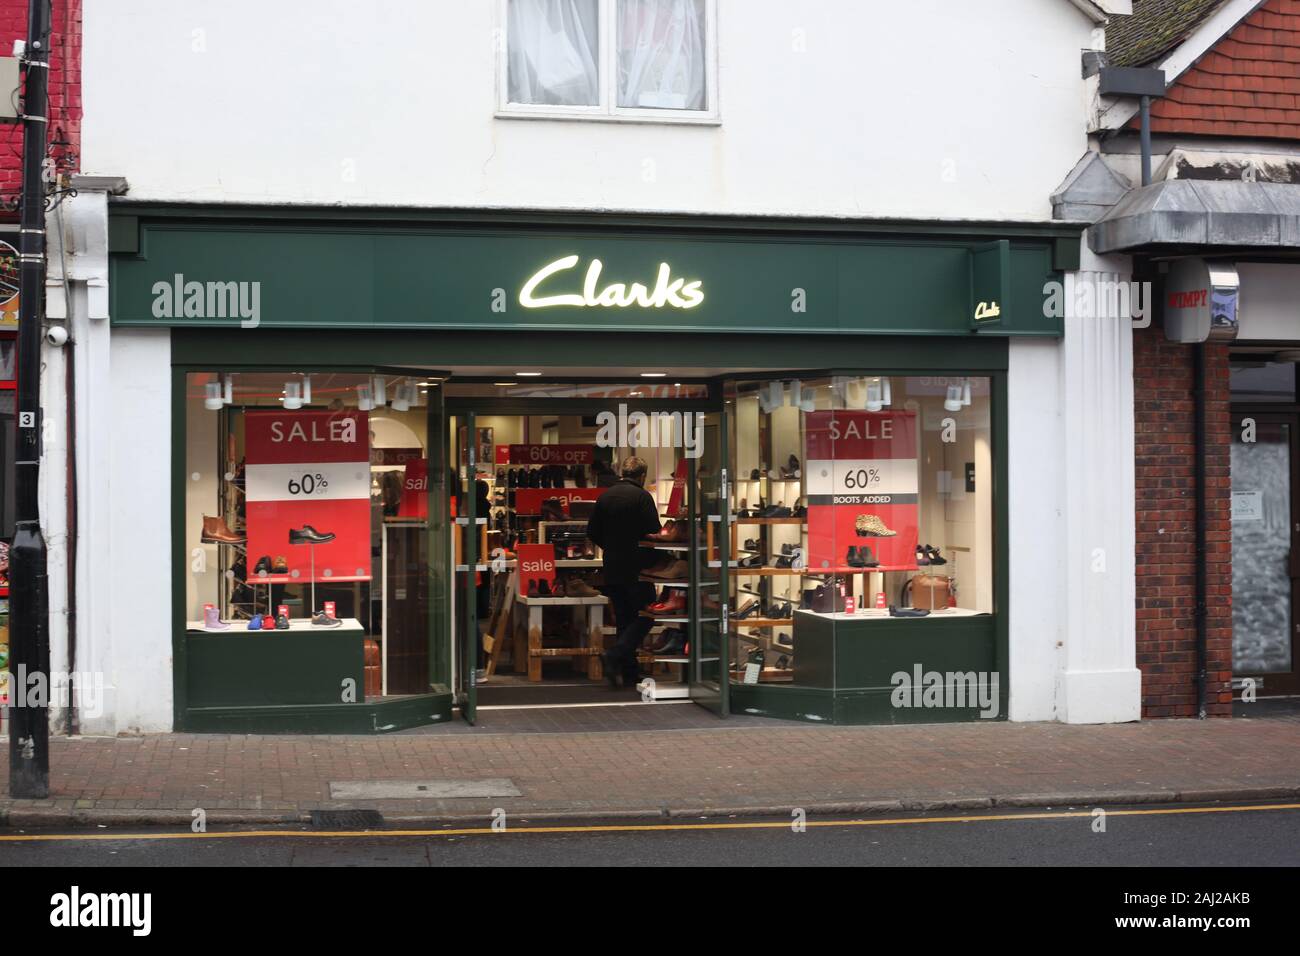 clarks shoes dundee